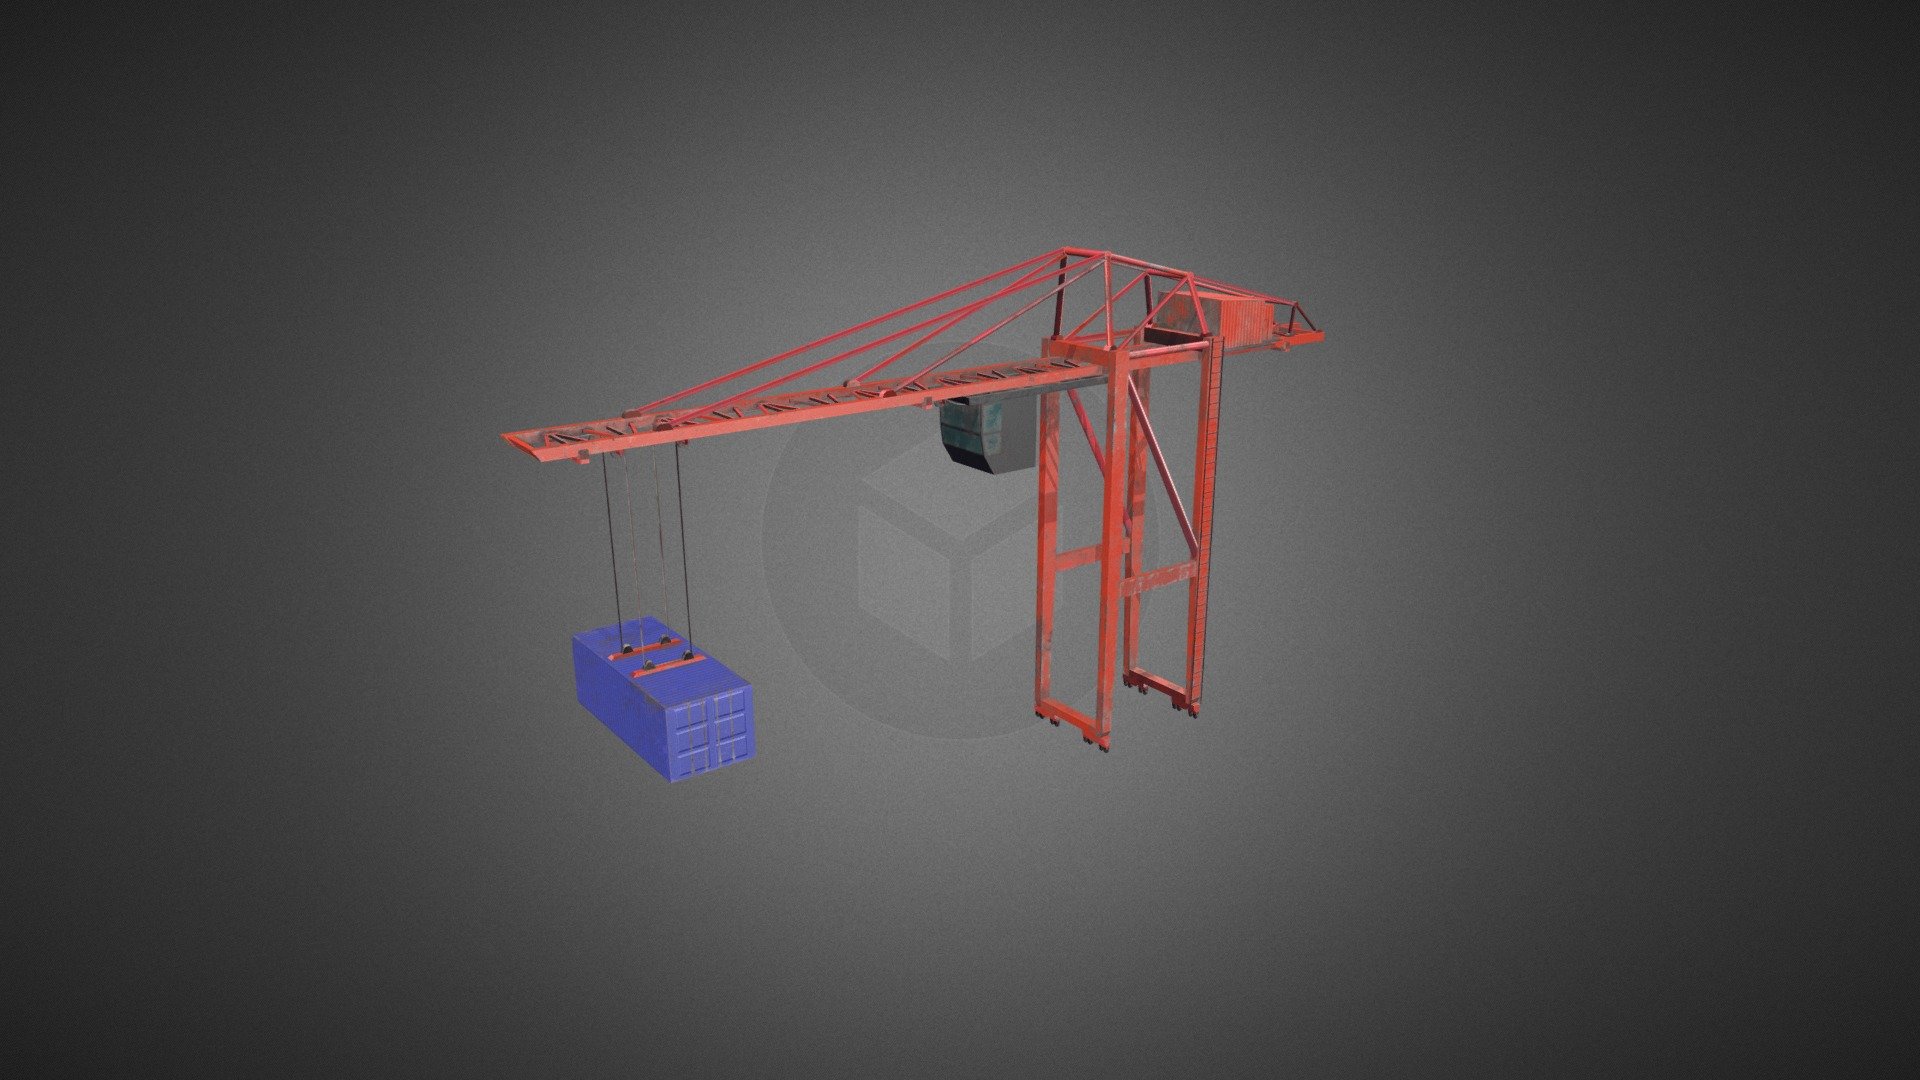 Low poly game-ready 3d model of a Port container crane - Port container crane - Buy Royalty Free 3D model by CG Duck (@cg_duck) 3d model